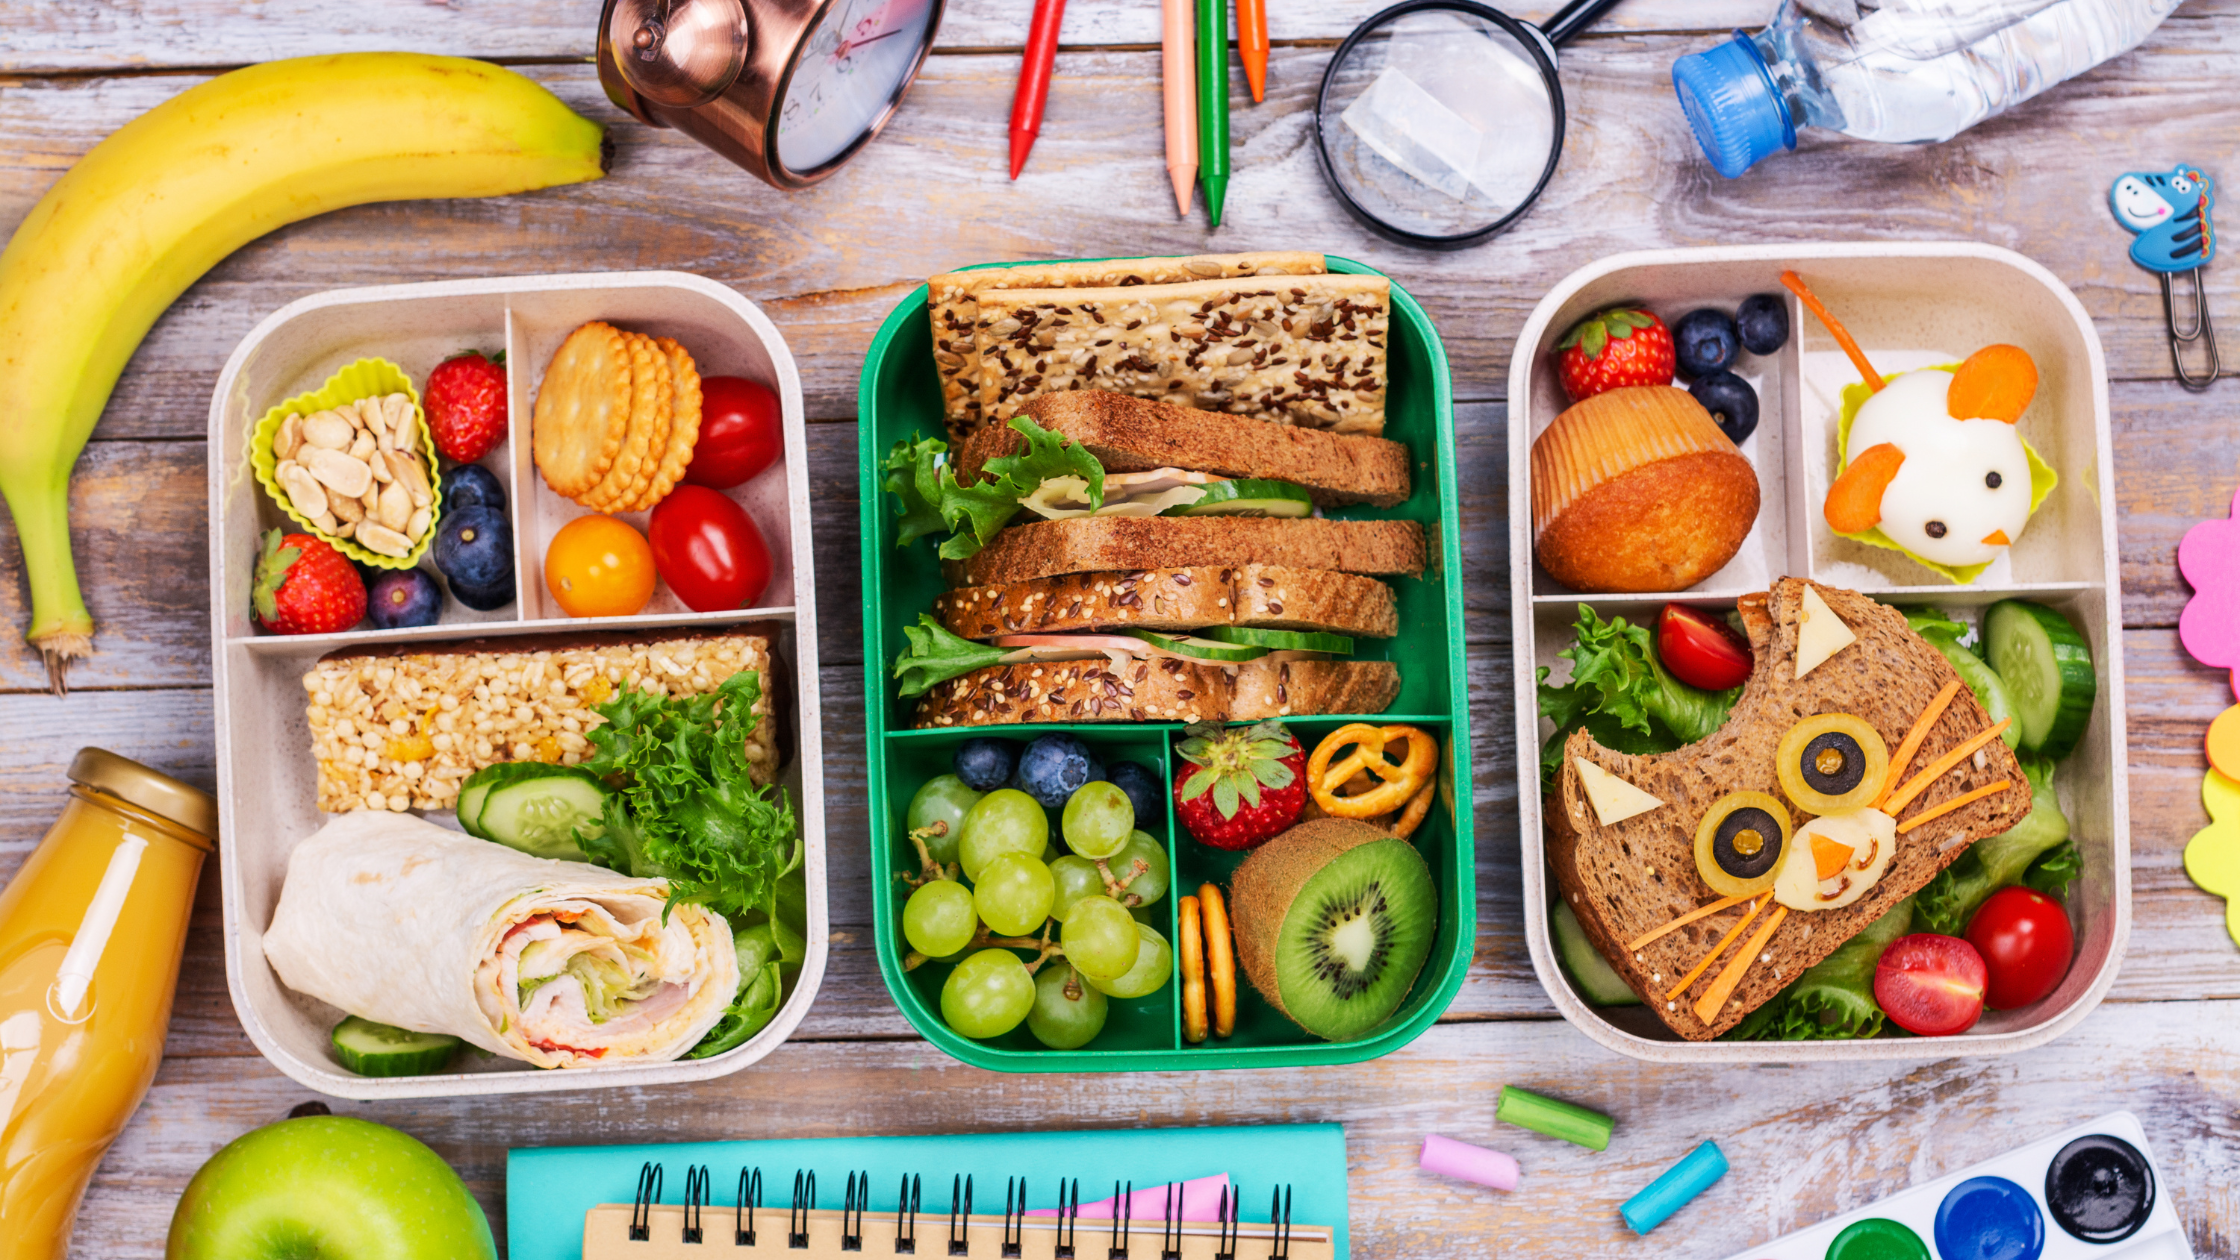 Wholesome and Delightful: Crafting Nutritious School Lunches for Kids